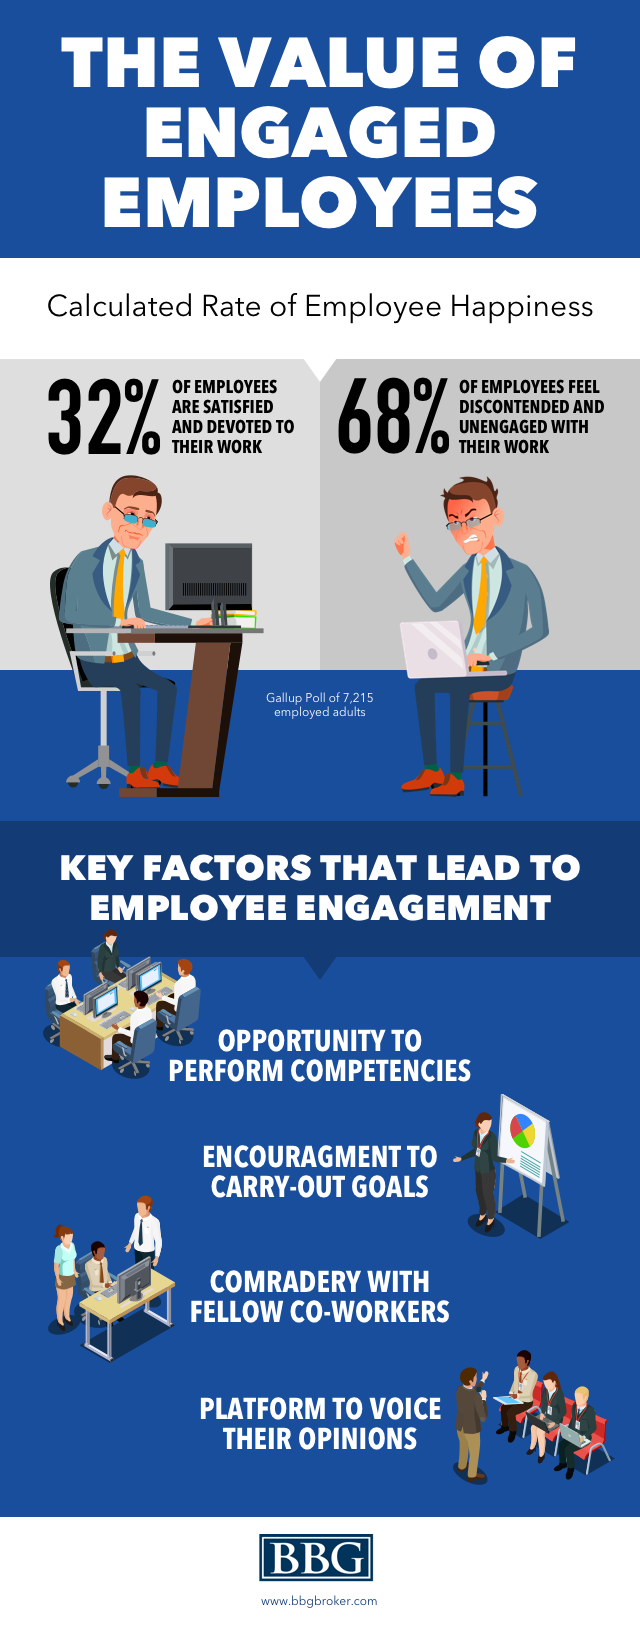 The Value of Engaged Employees Infographic